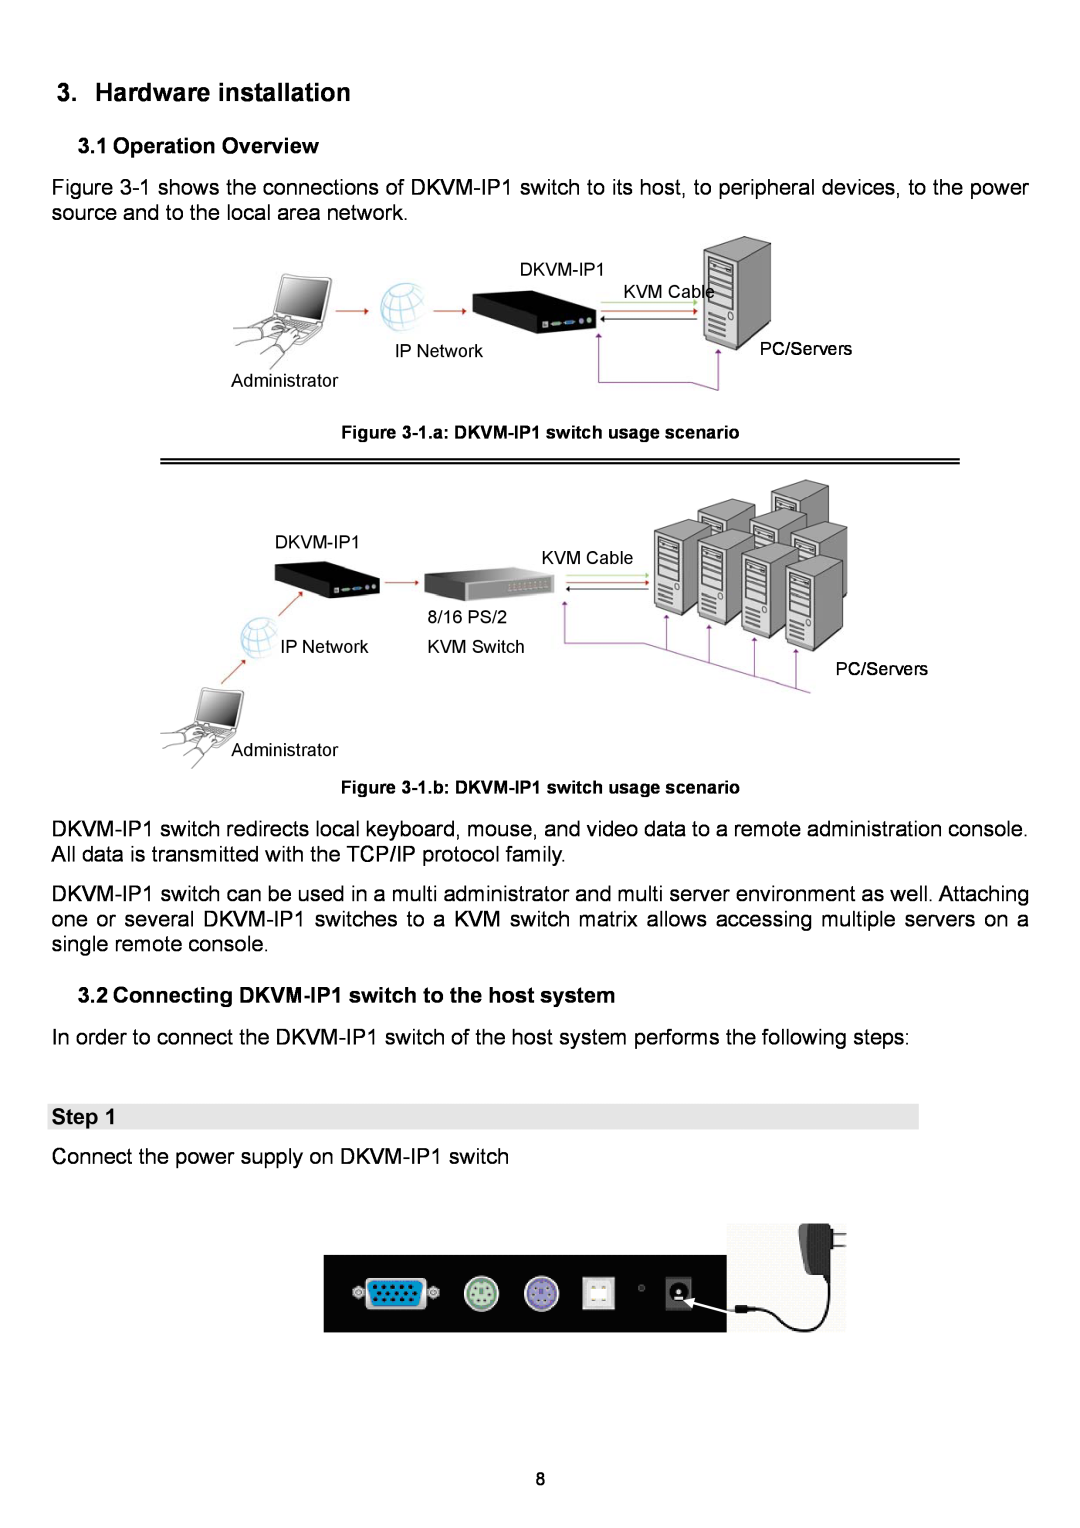 D-Link manual Hardware installation, Operation Overview, Connecting DKVM-IP1 switch to the host system, Step 